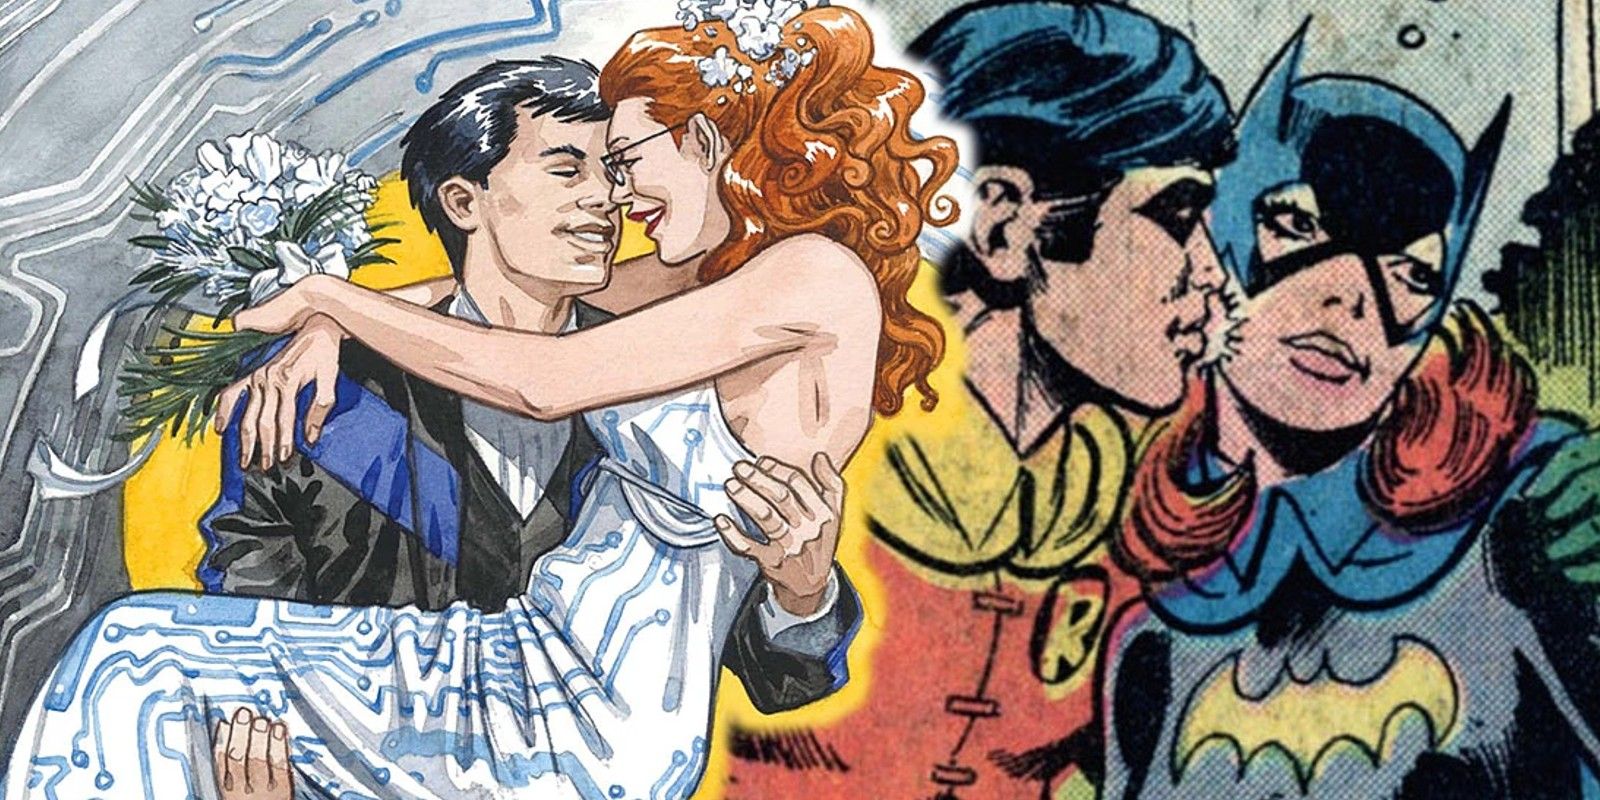 A blended image features Dick Grayson and Barbara Gordon marrying as well as in their classic Robin and Batgirl costumes